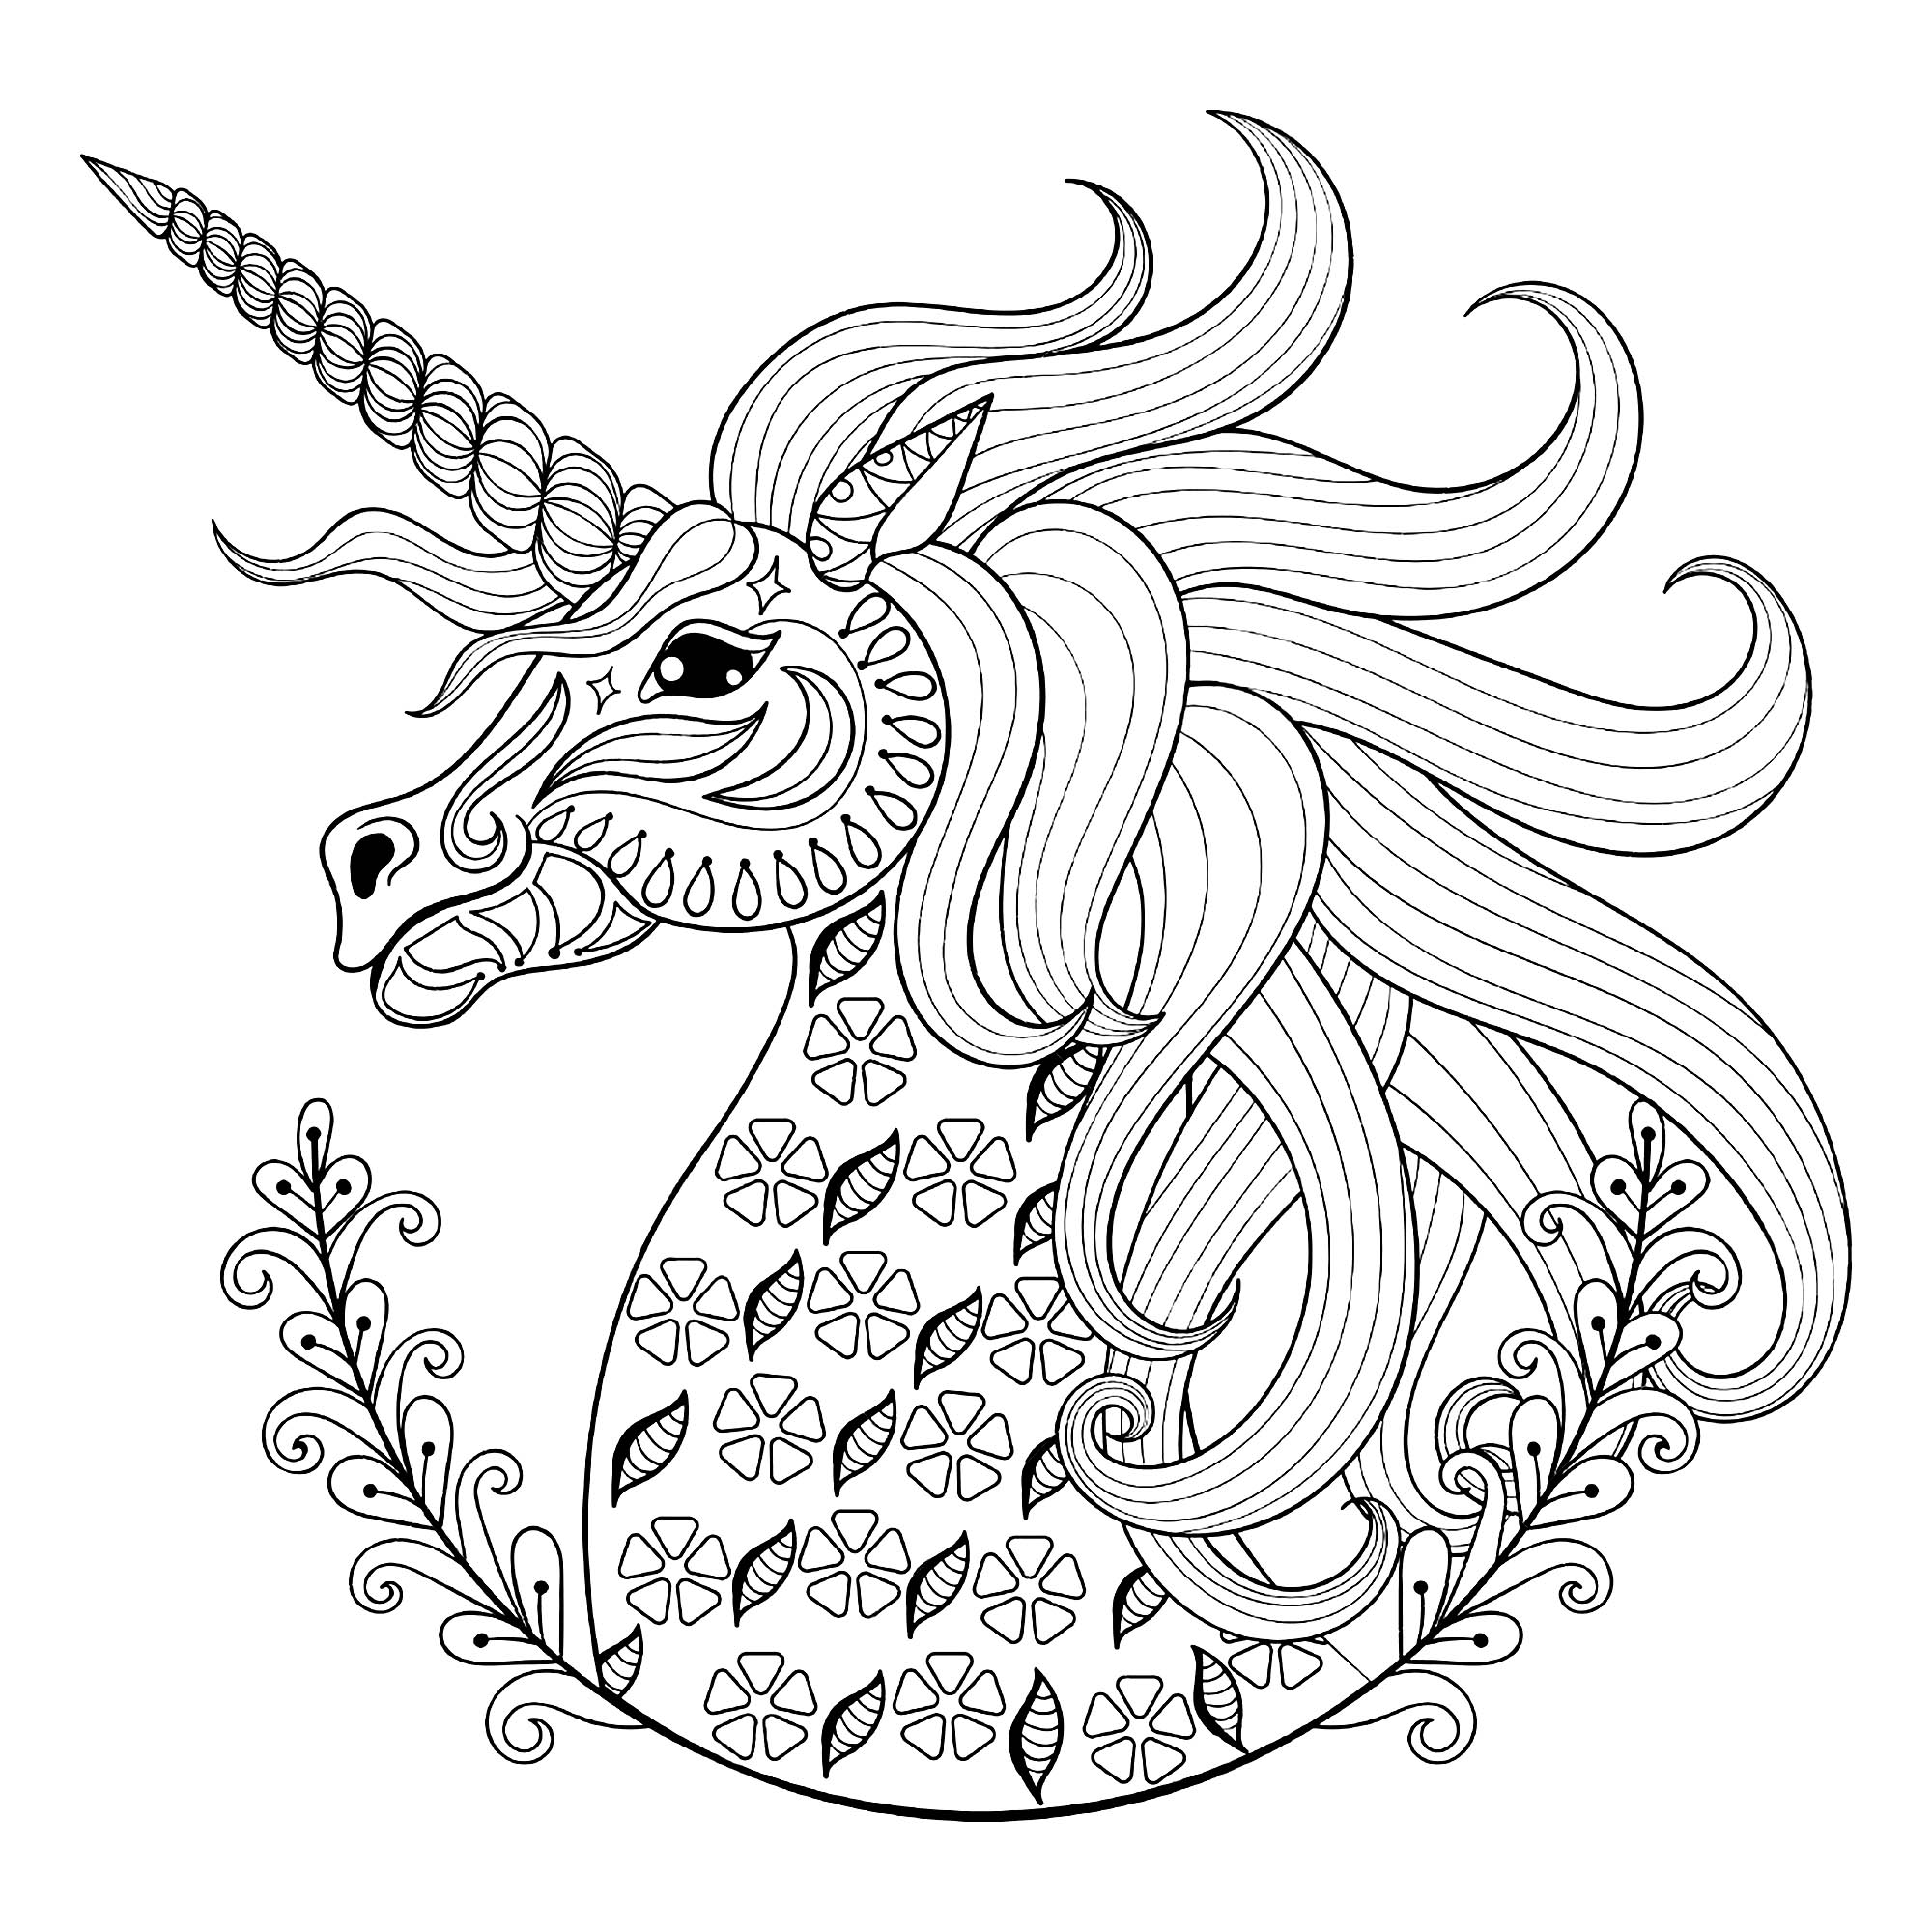 simple unicorn coloring pages